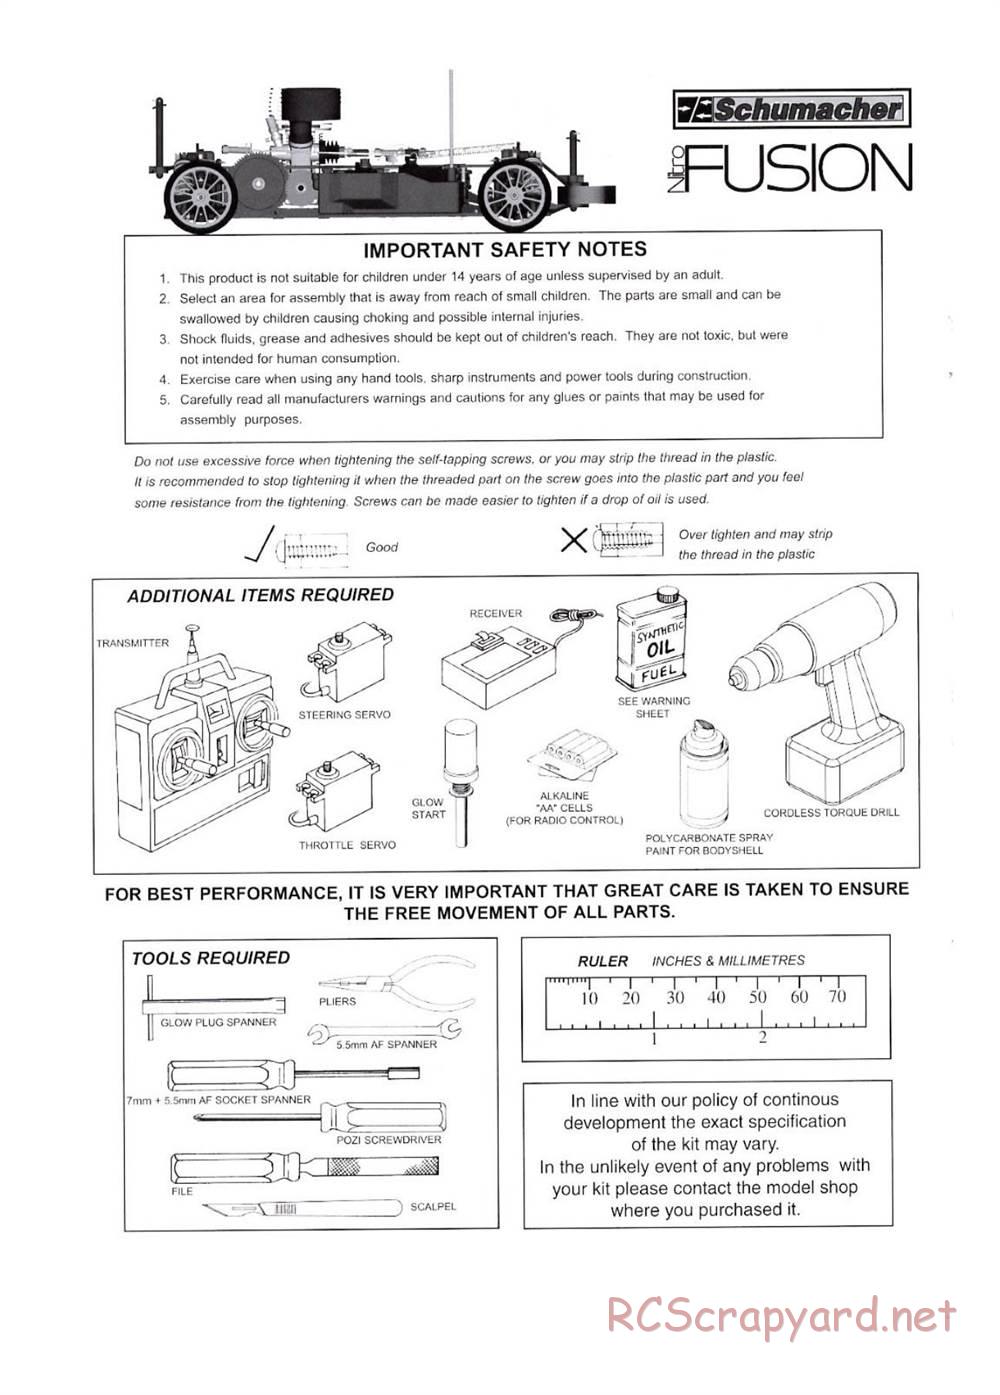 Schumacher - Fusion 21 - Manual - Page 2